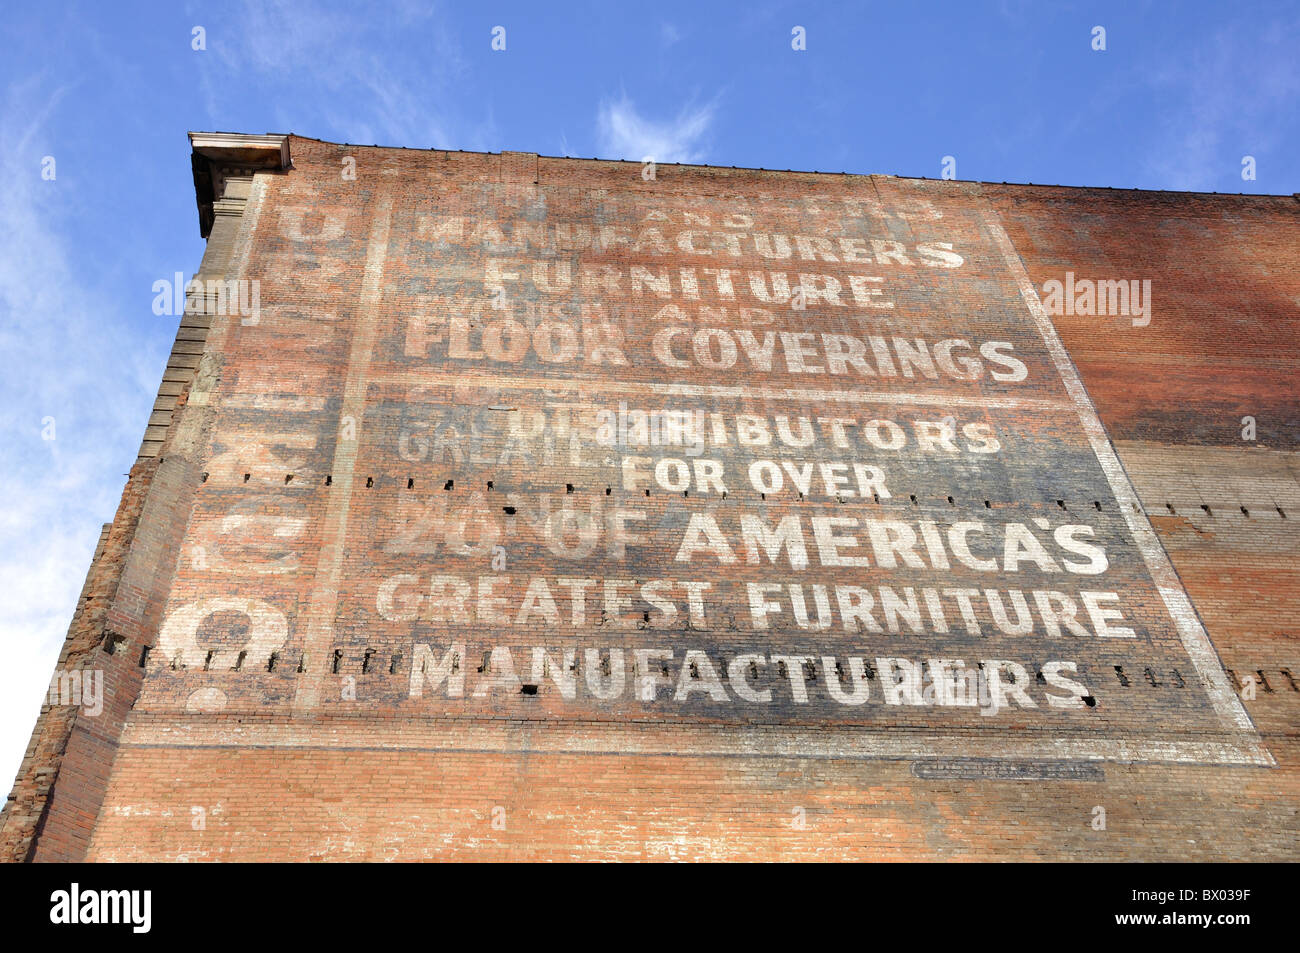 Building with old advertisement painted on it, Dallas, Texas, USA Stock Photo